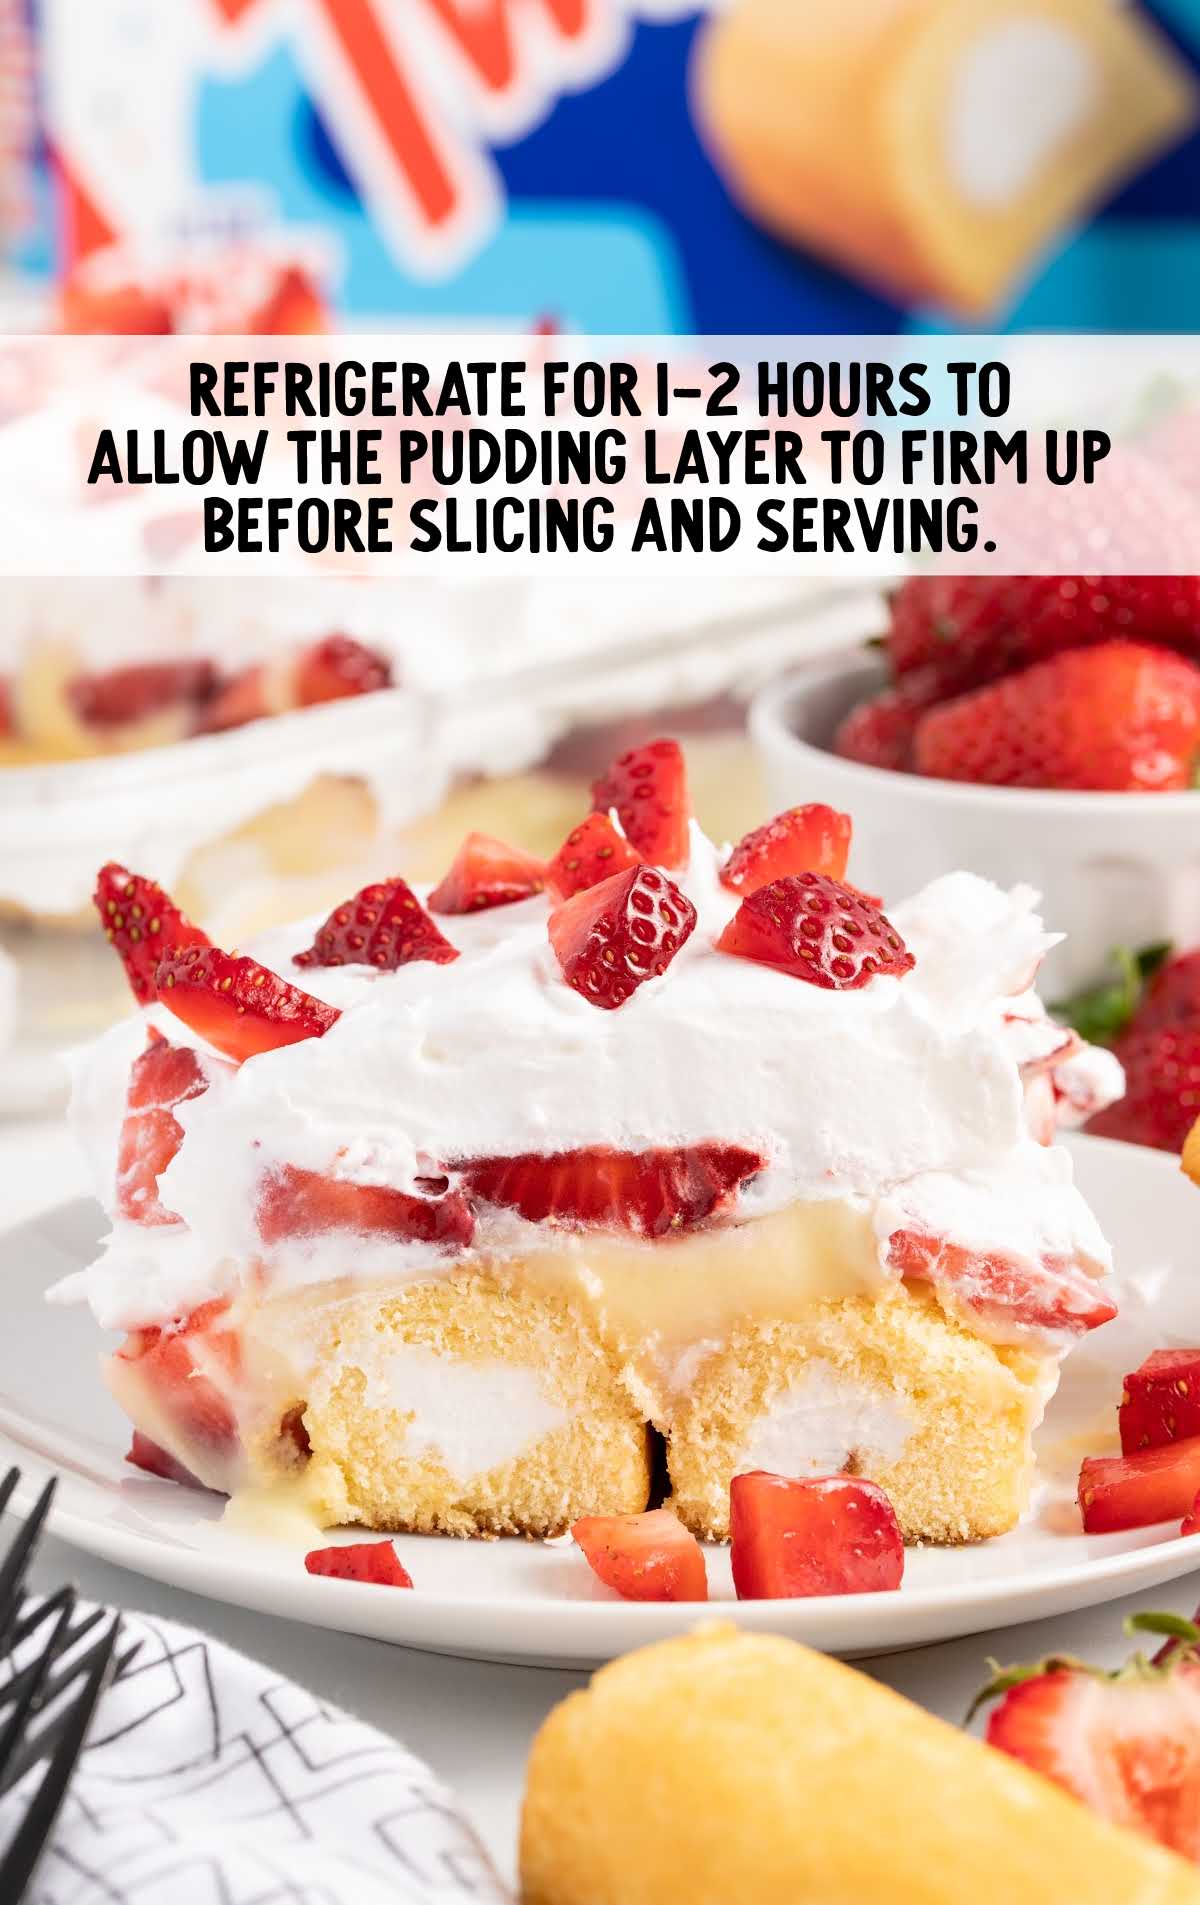 a slice of Twinkie Cake topped with cut up strawberries on a plate